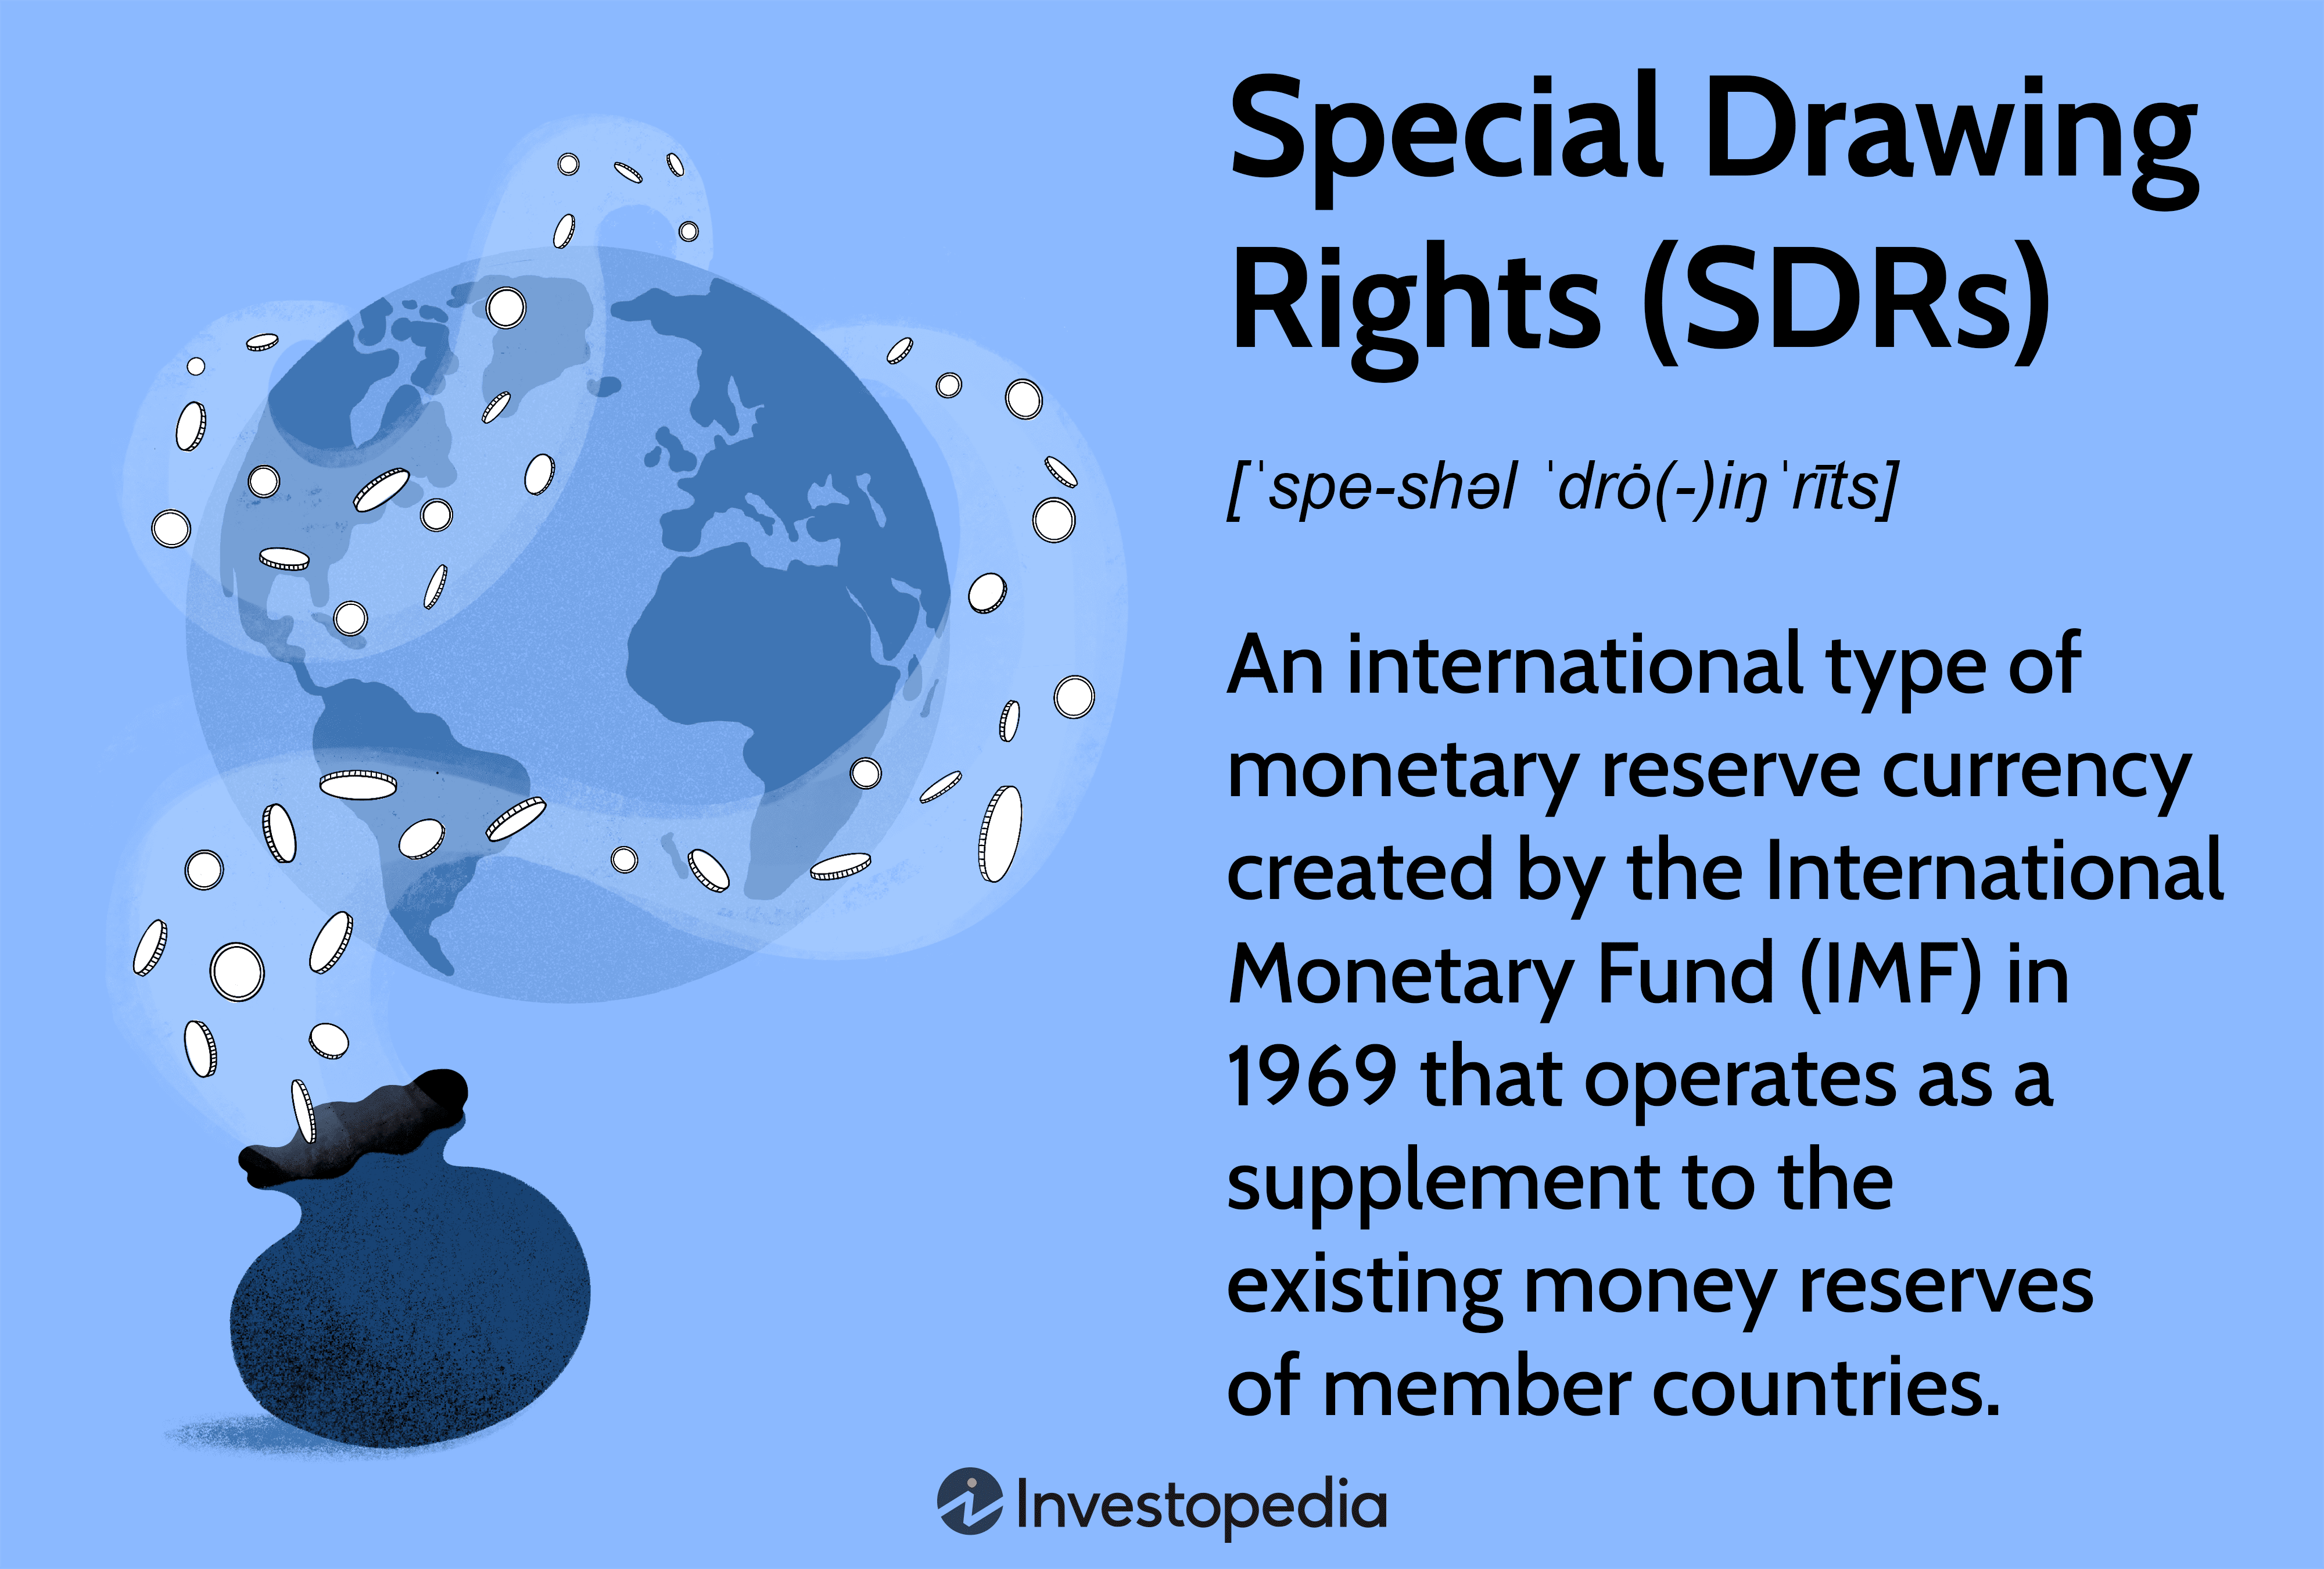 Special Drawing Rights (SDRs): An international type of monetary reserve currency created by the International Monetary Fund (IMF) in 1969 that operates as a supplement to the existing money reserves of member countries.